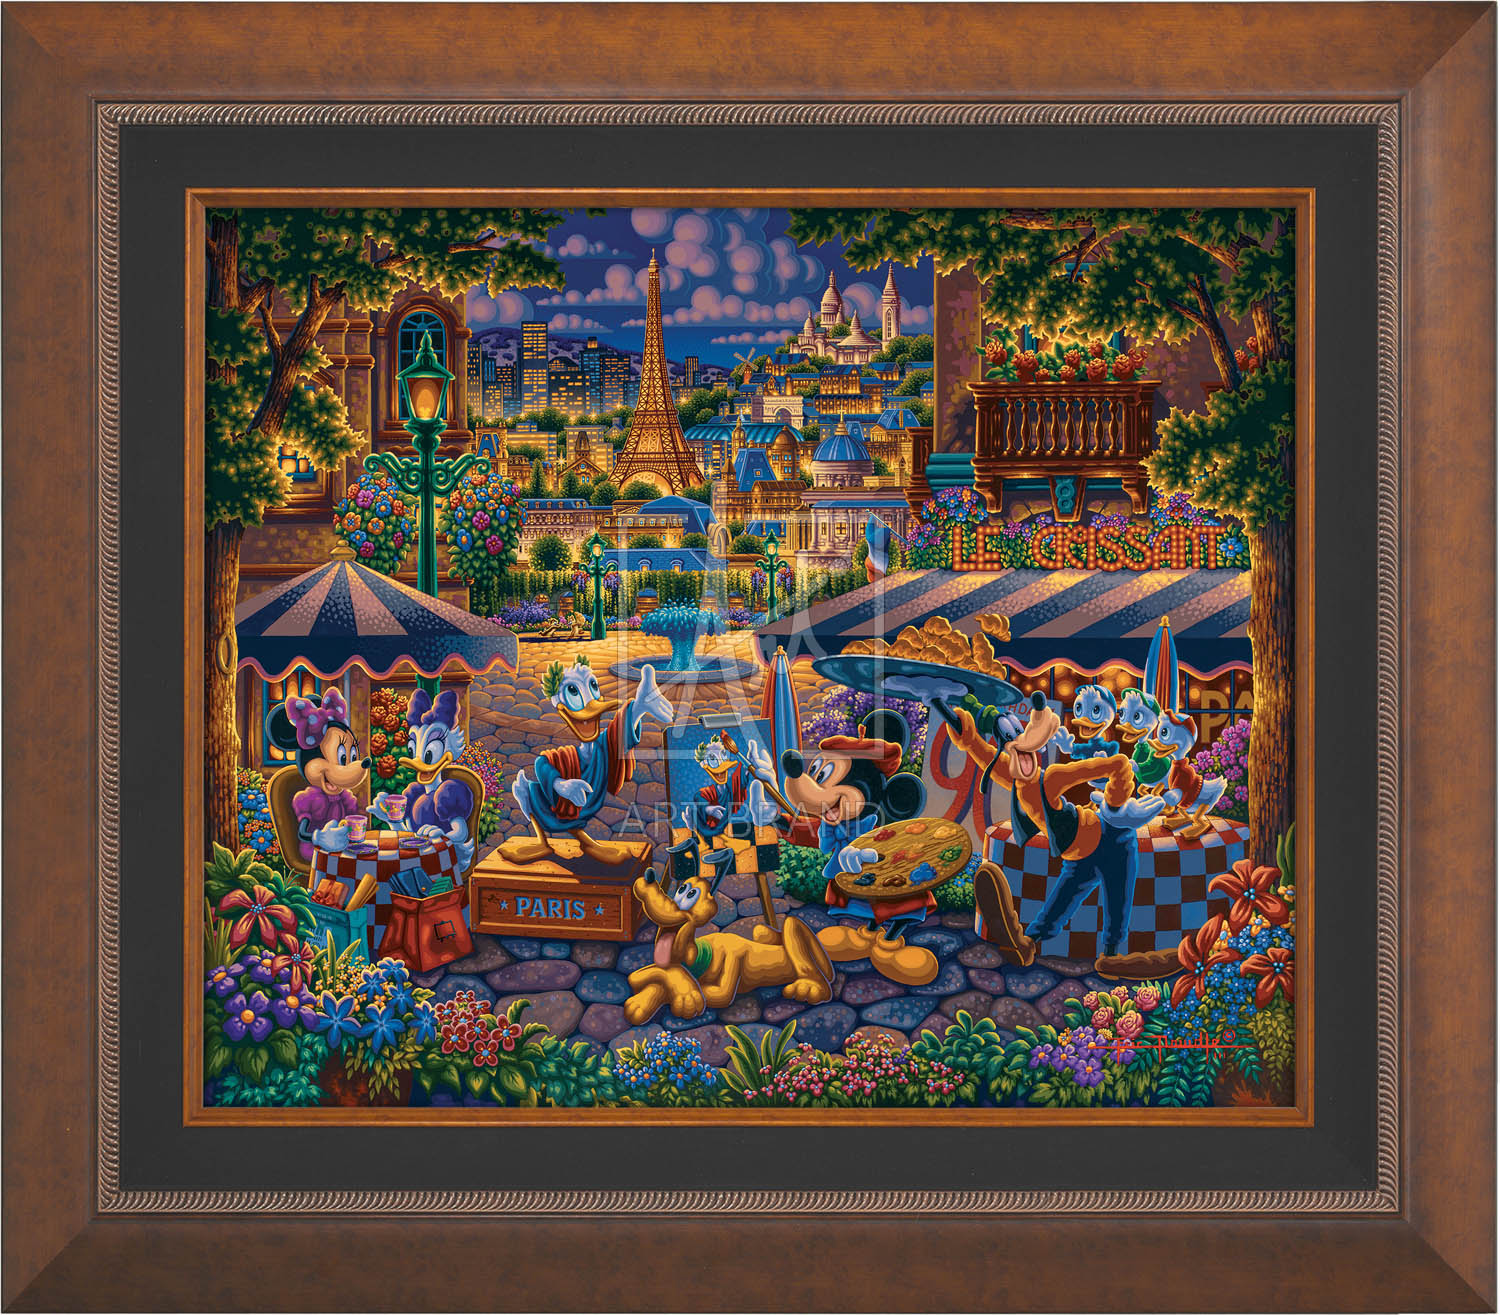 Mickey Mouse and Donald Duck playing the part of both artist and model, as they enjoy the company of friends, in the courtyard plaza in Paris - Aurora Copper Frame